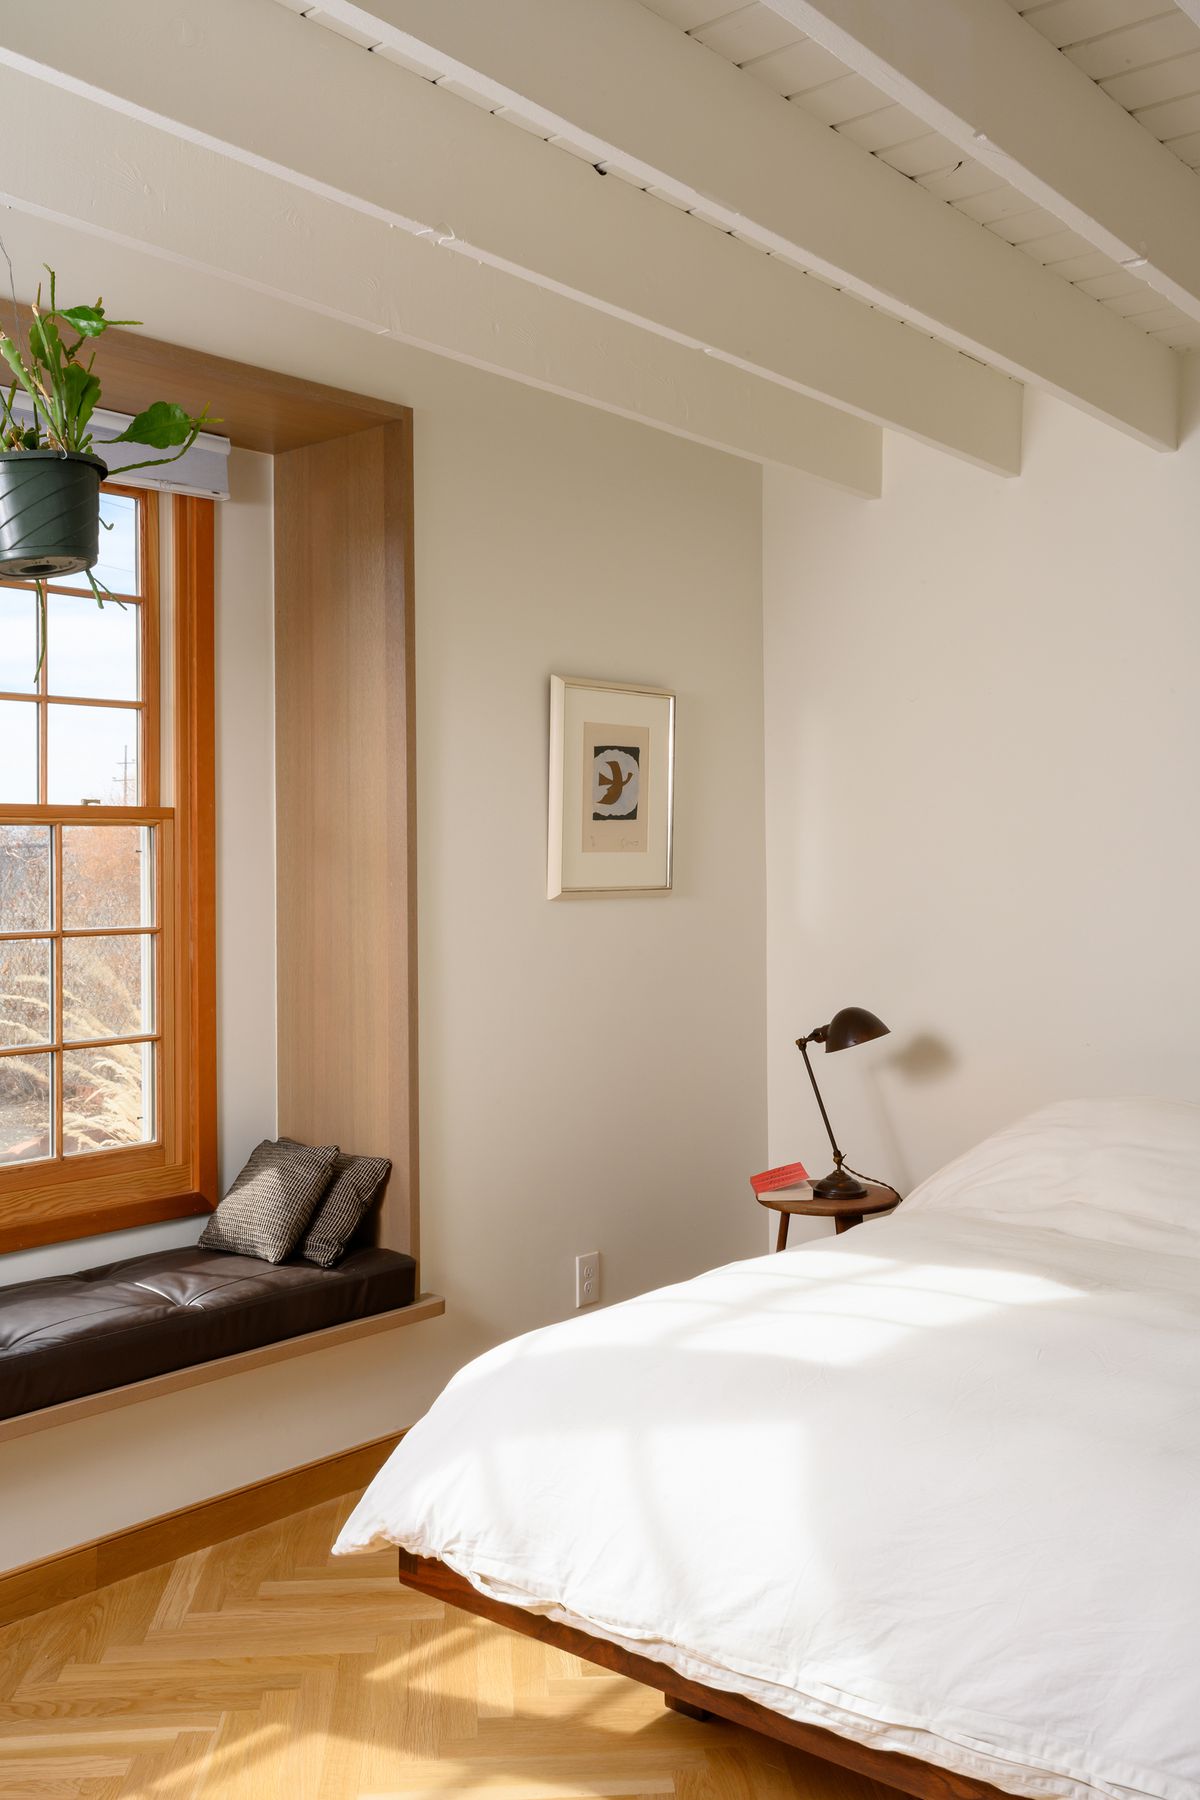 The bedroom, ceiling beams are painted white, there is a herringbone wood floor, a white bed spread and a window seat with a brown leather cushion and plant hanging.